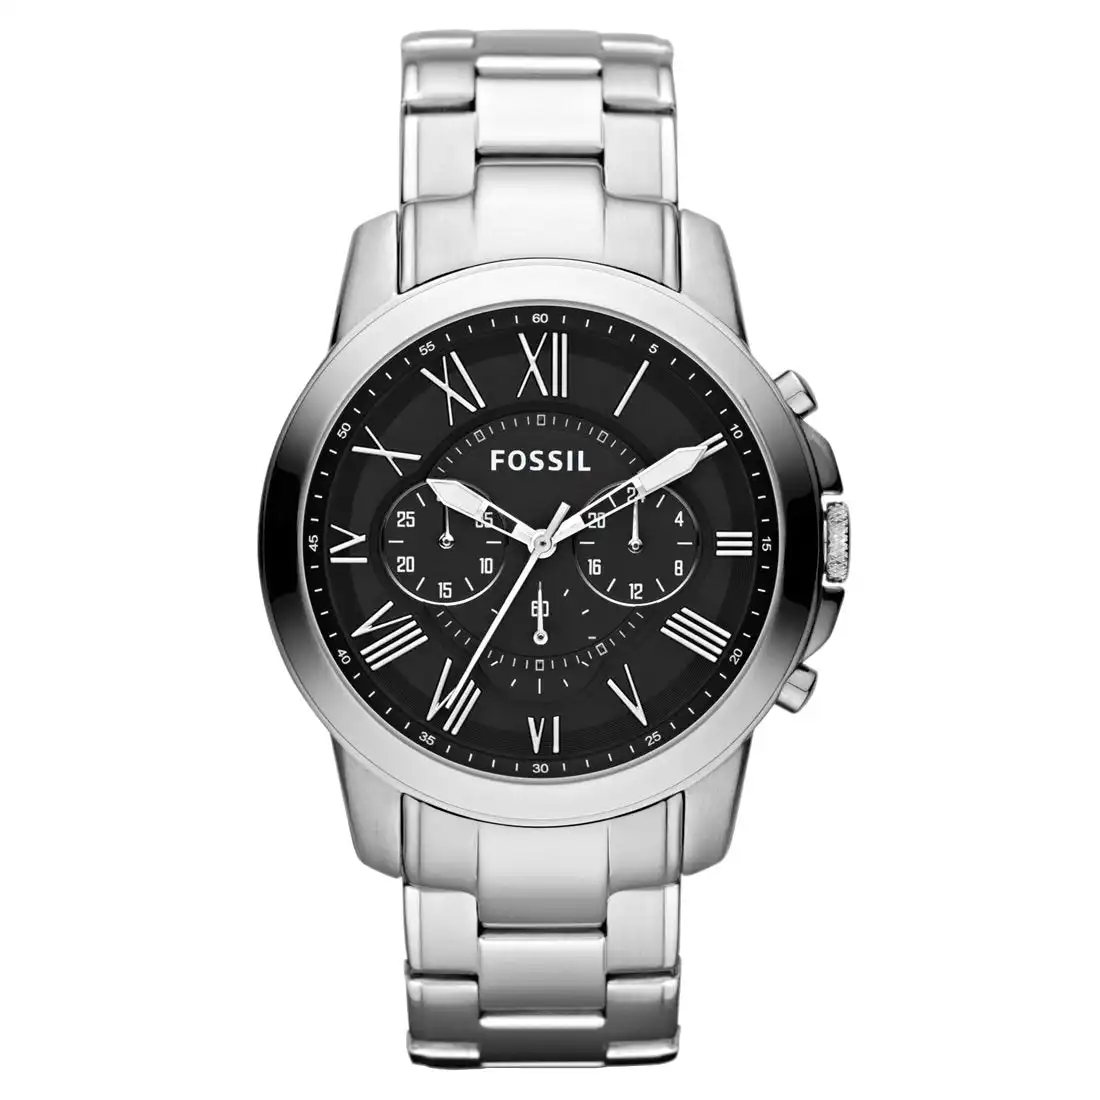 Fossil Mens Chronograph Watch FS4736